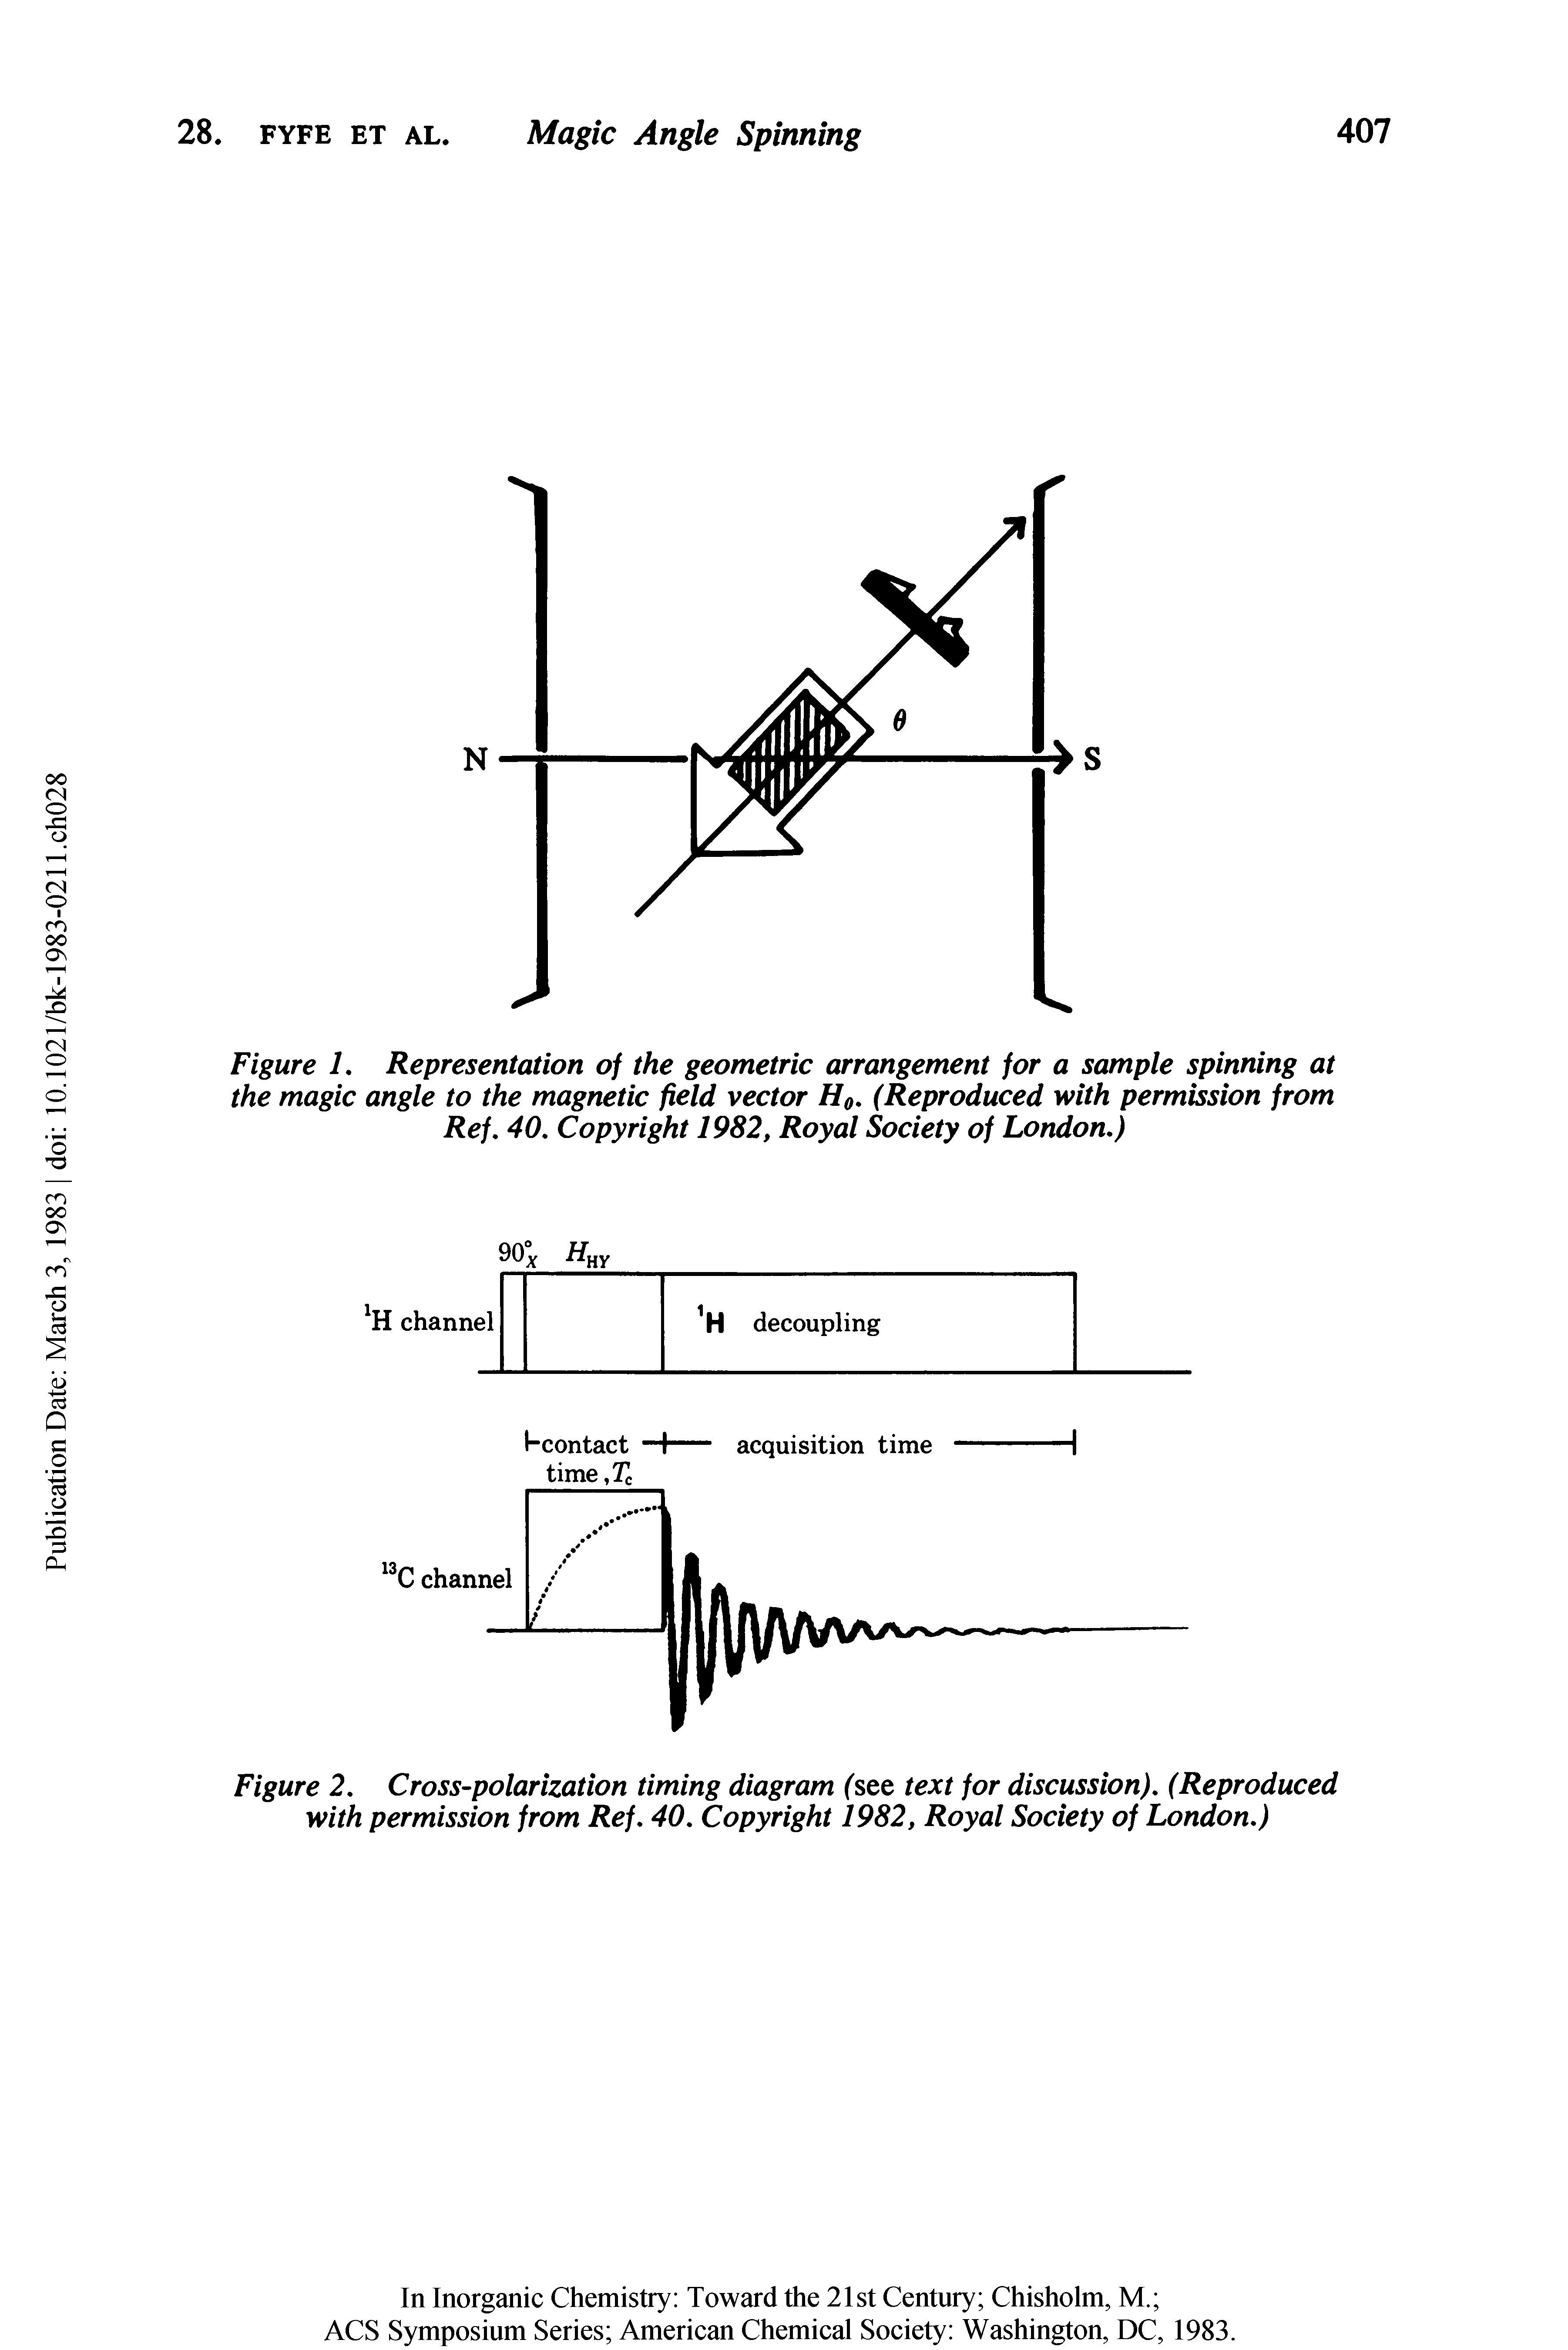 Figure 2, Cross-polarization timing diagram ( see text for discussion), (Reproduced with permission from Ref, 40, Copyright 1982, Royal Society of London,)...